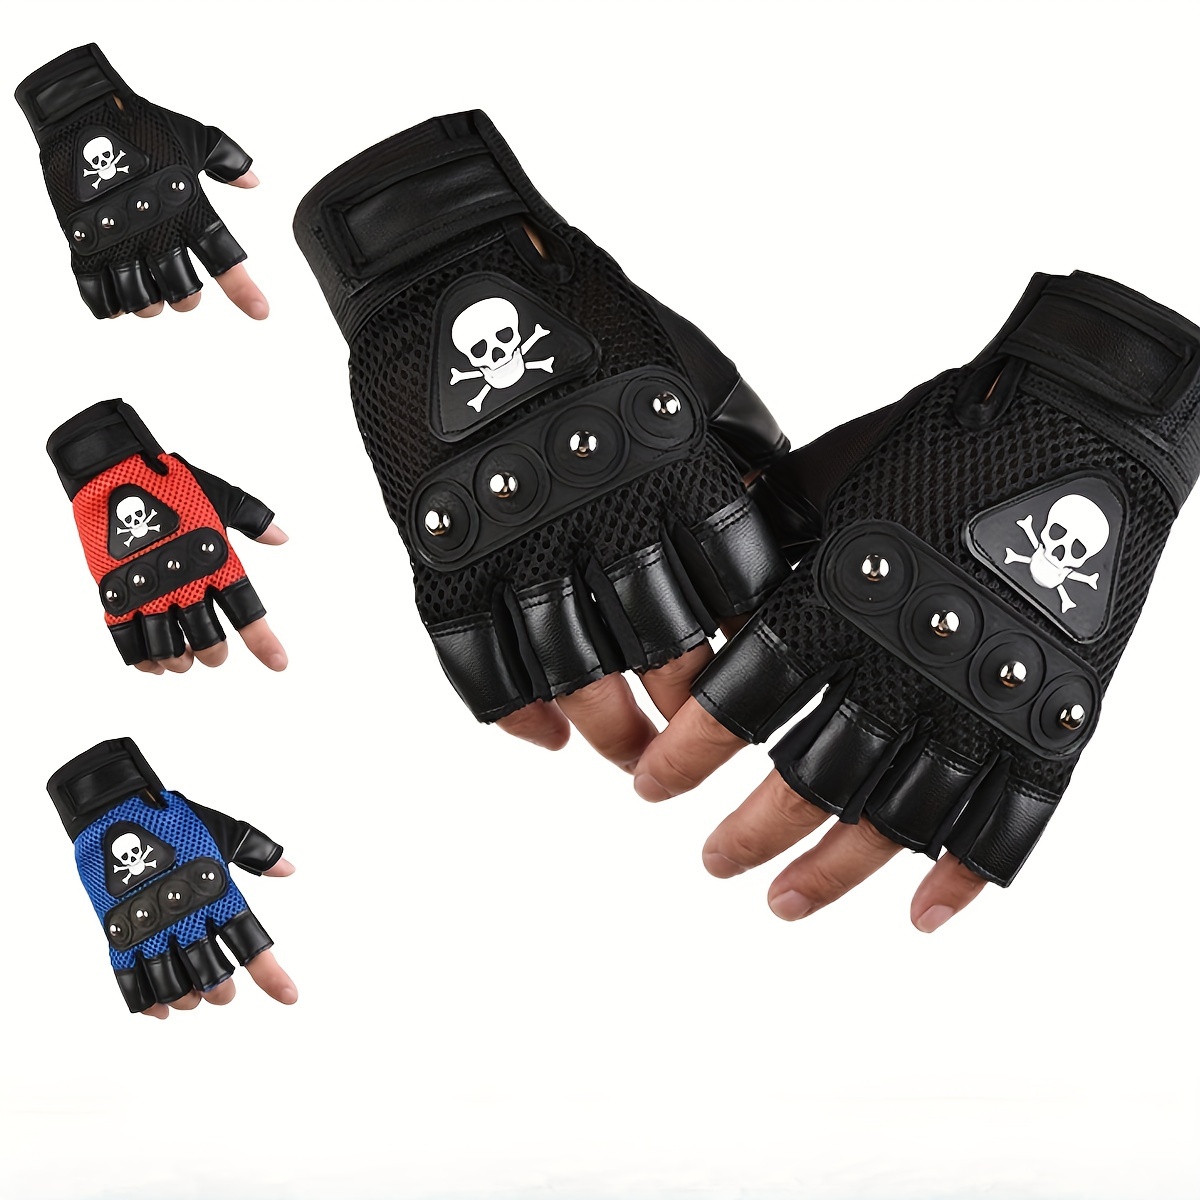 

Men's Gloves, Outdoor White Rivets Half-finger Gloves, Pu Leather Autumn And Winter Sports Gloves, Couples Cycling Gloves